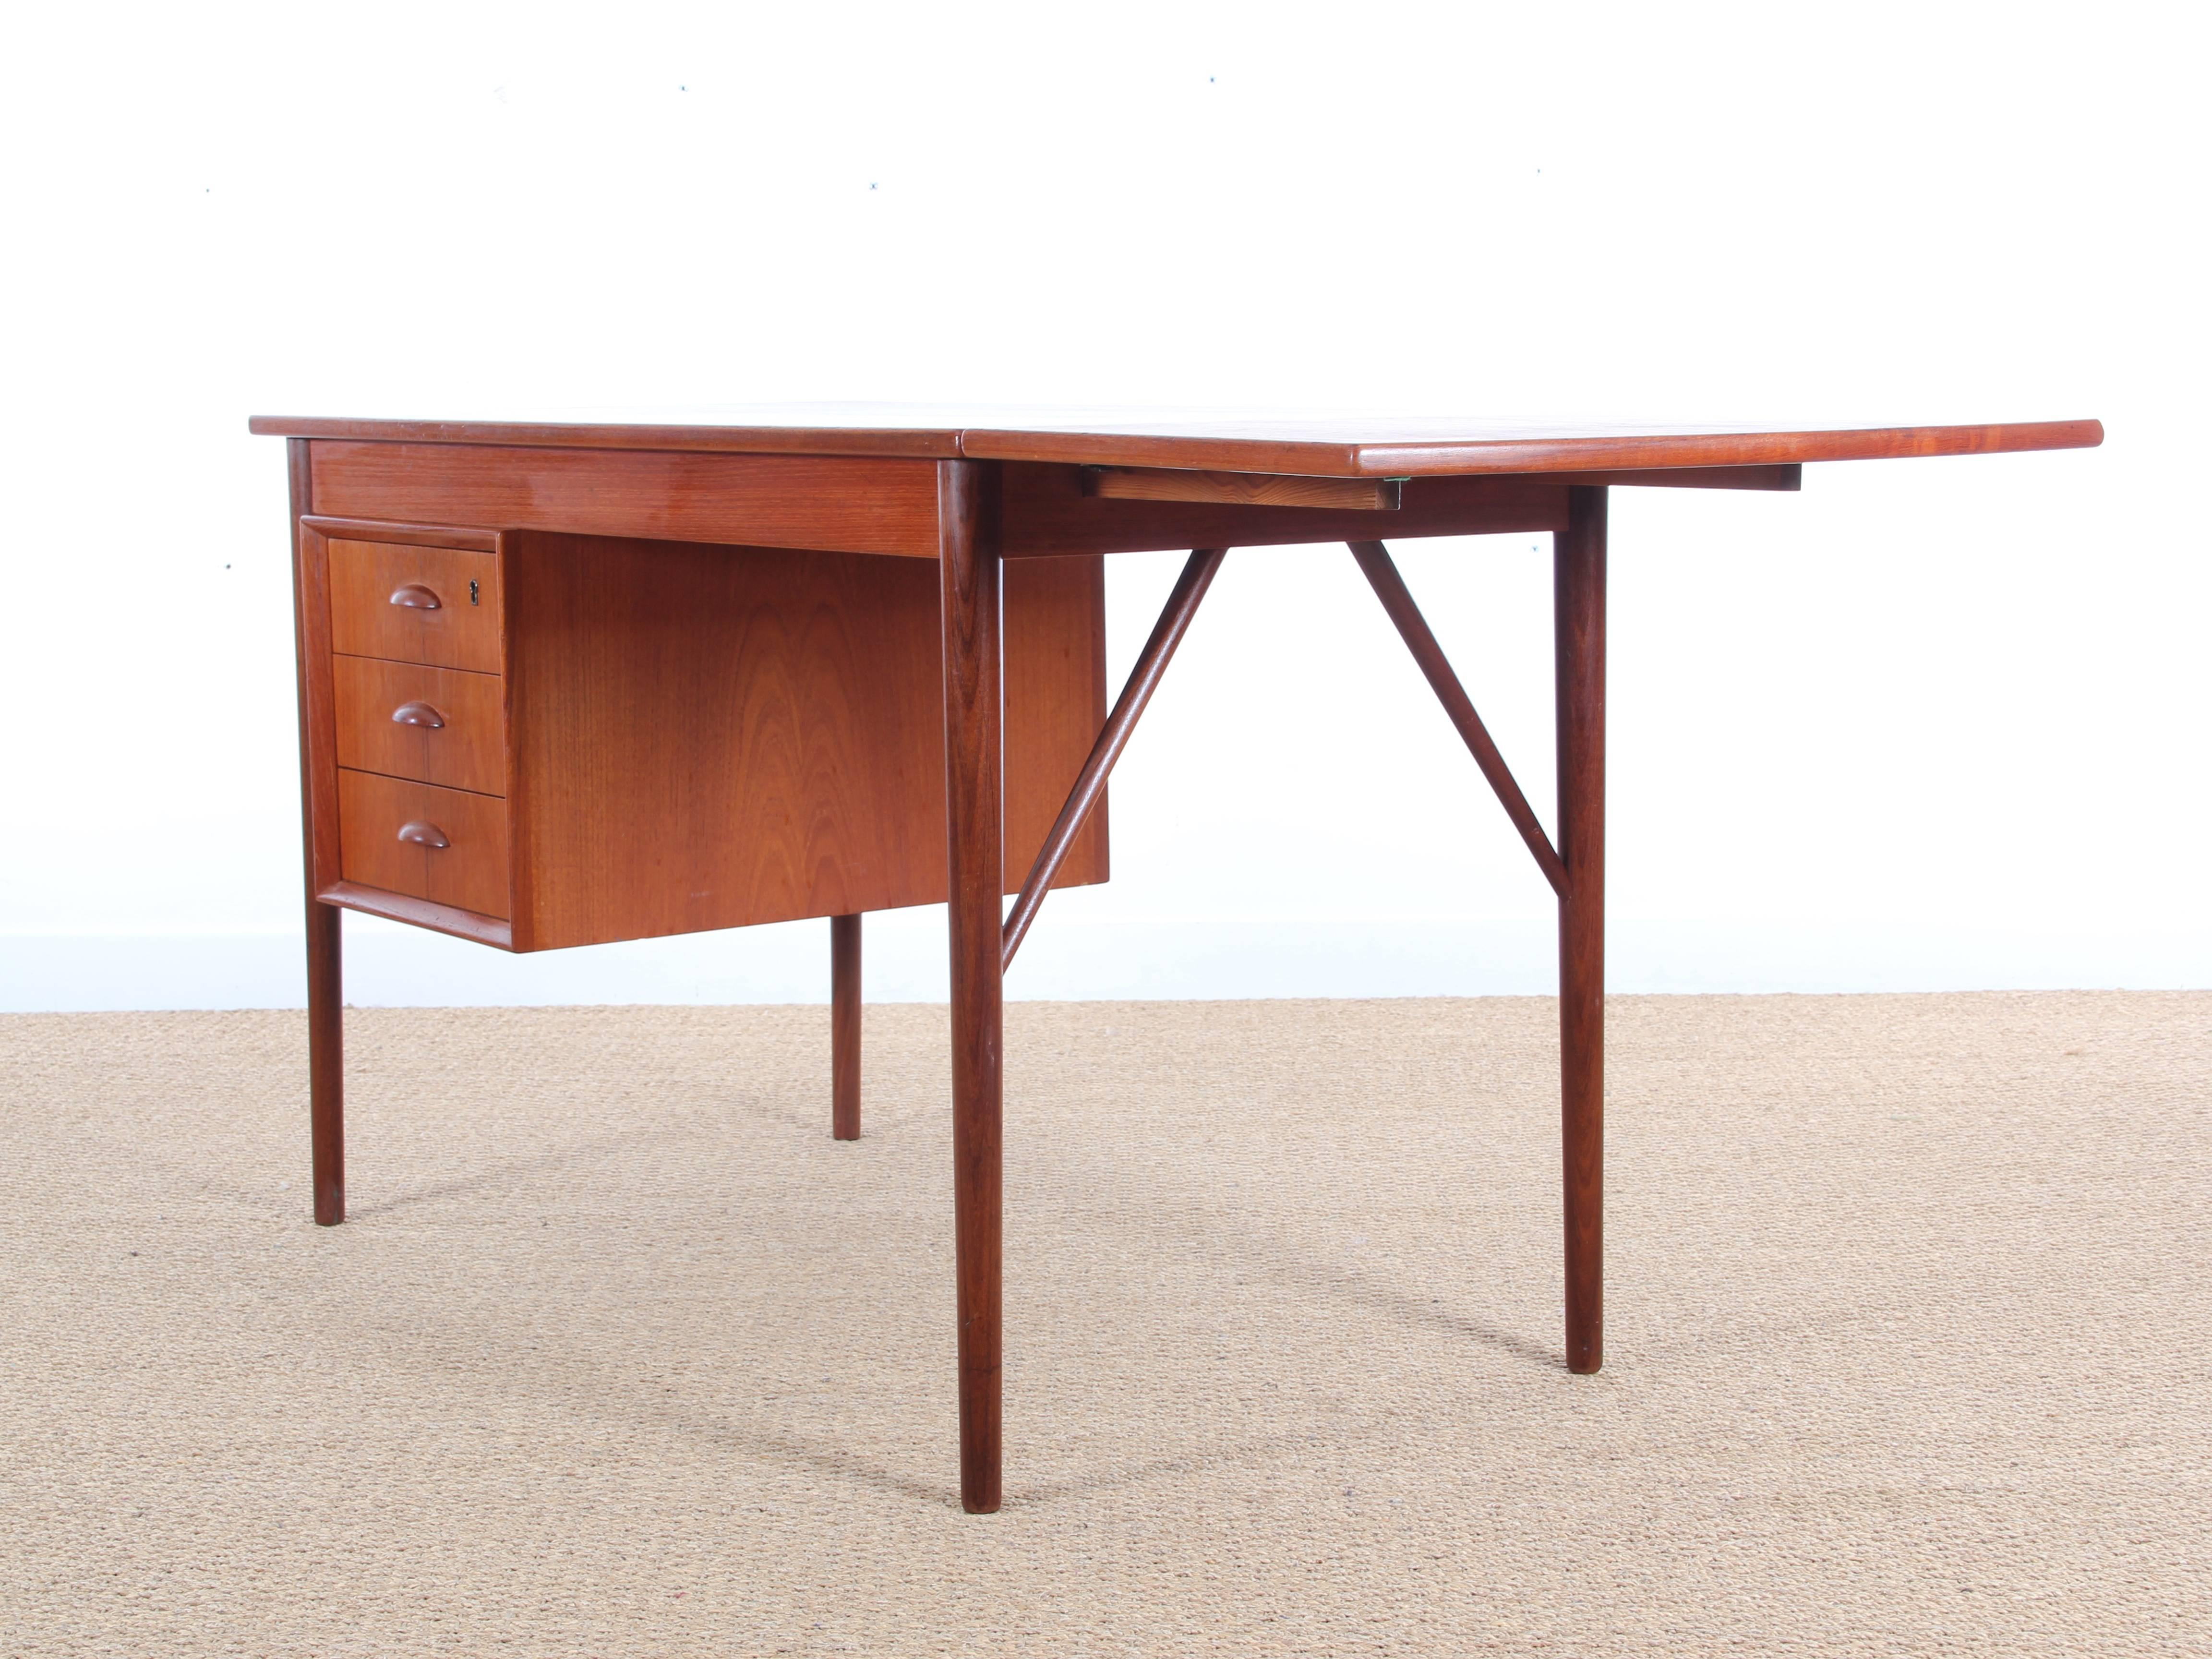 Mid-Century Modern writing desk in teak, in Arne Vodder style. Three drawers and extension leaf.